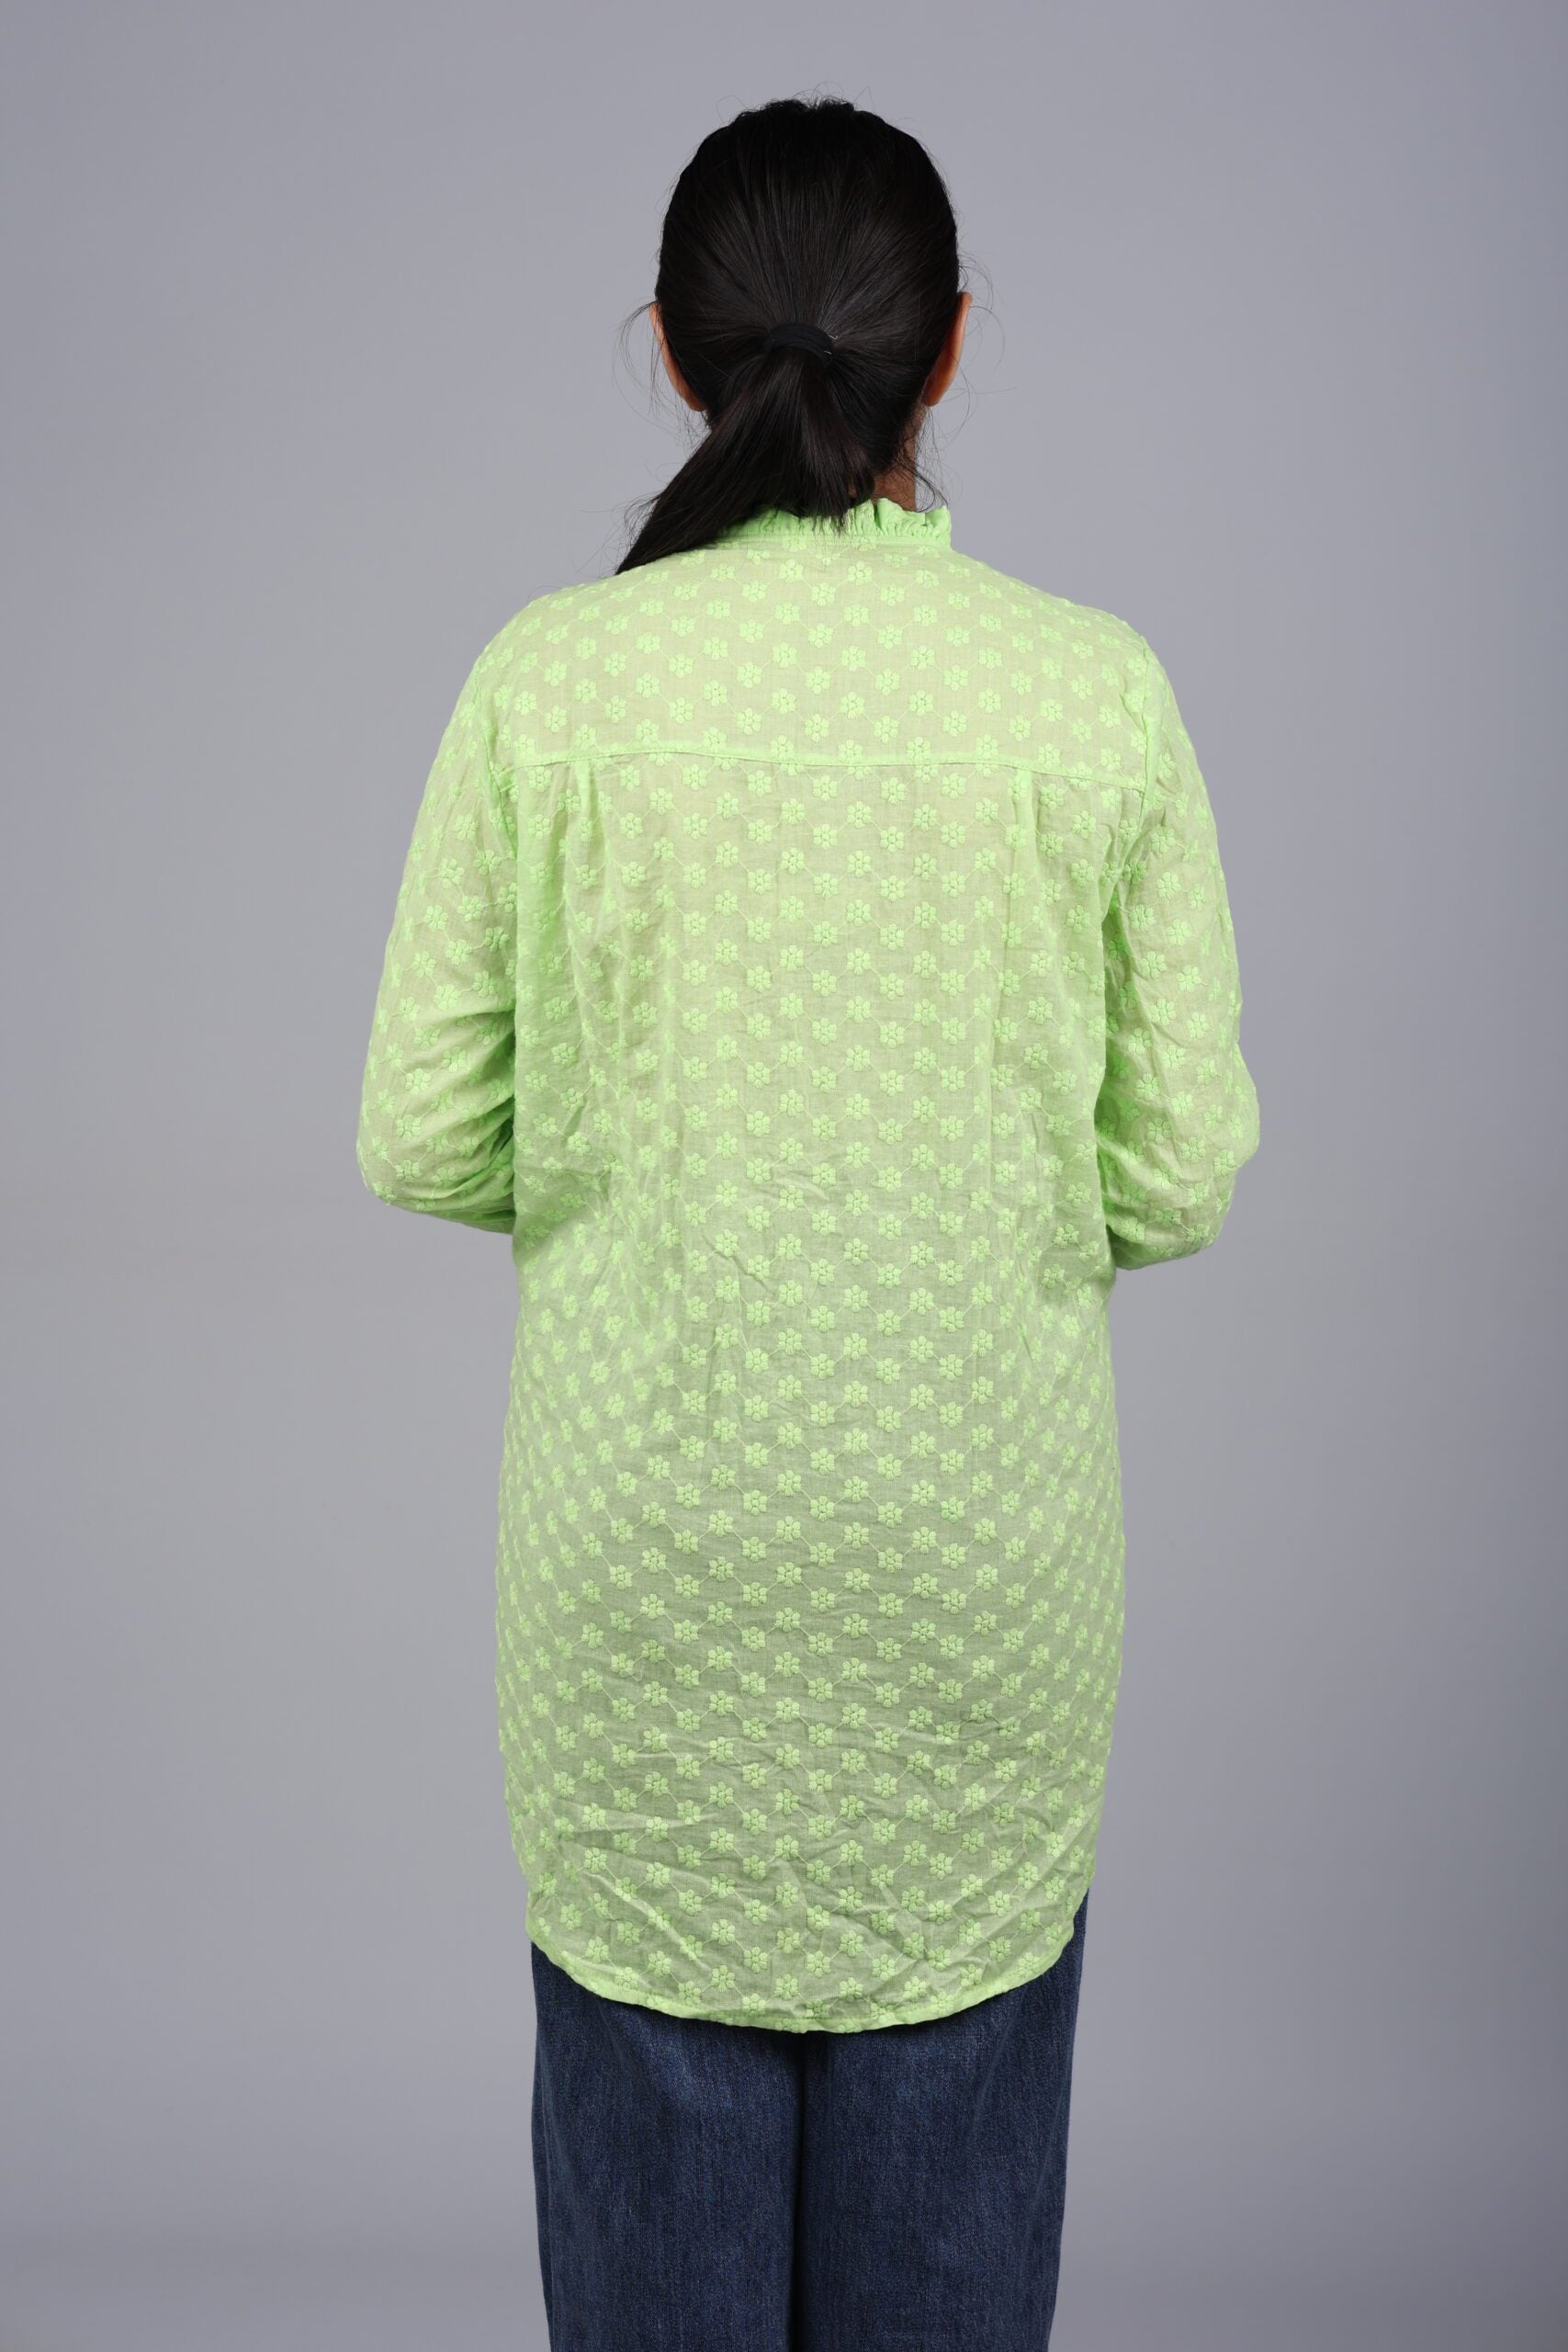 Chicken Shirt Designer (Lime Green) Elevate Your Style